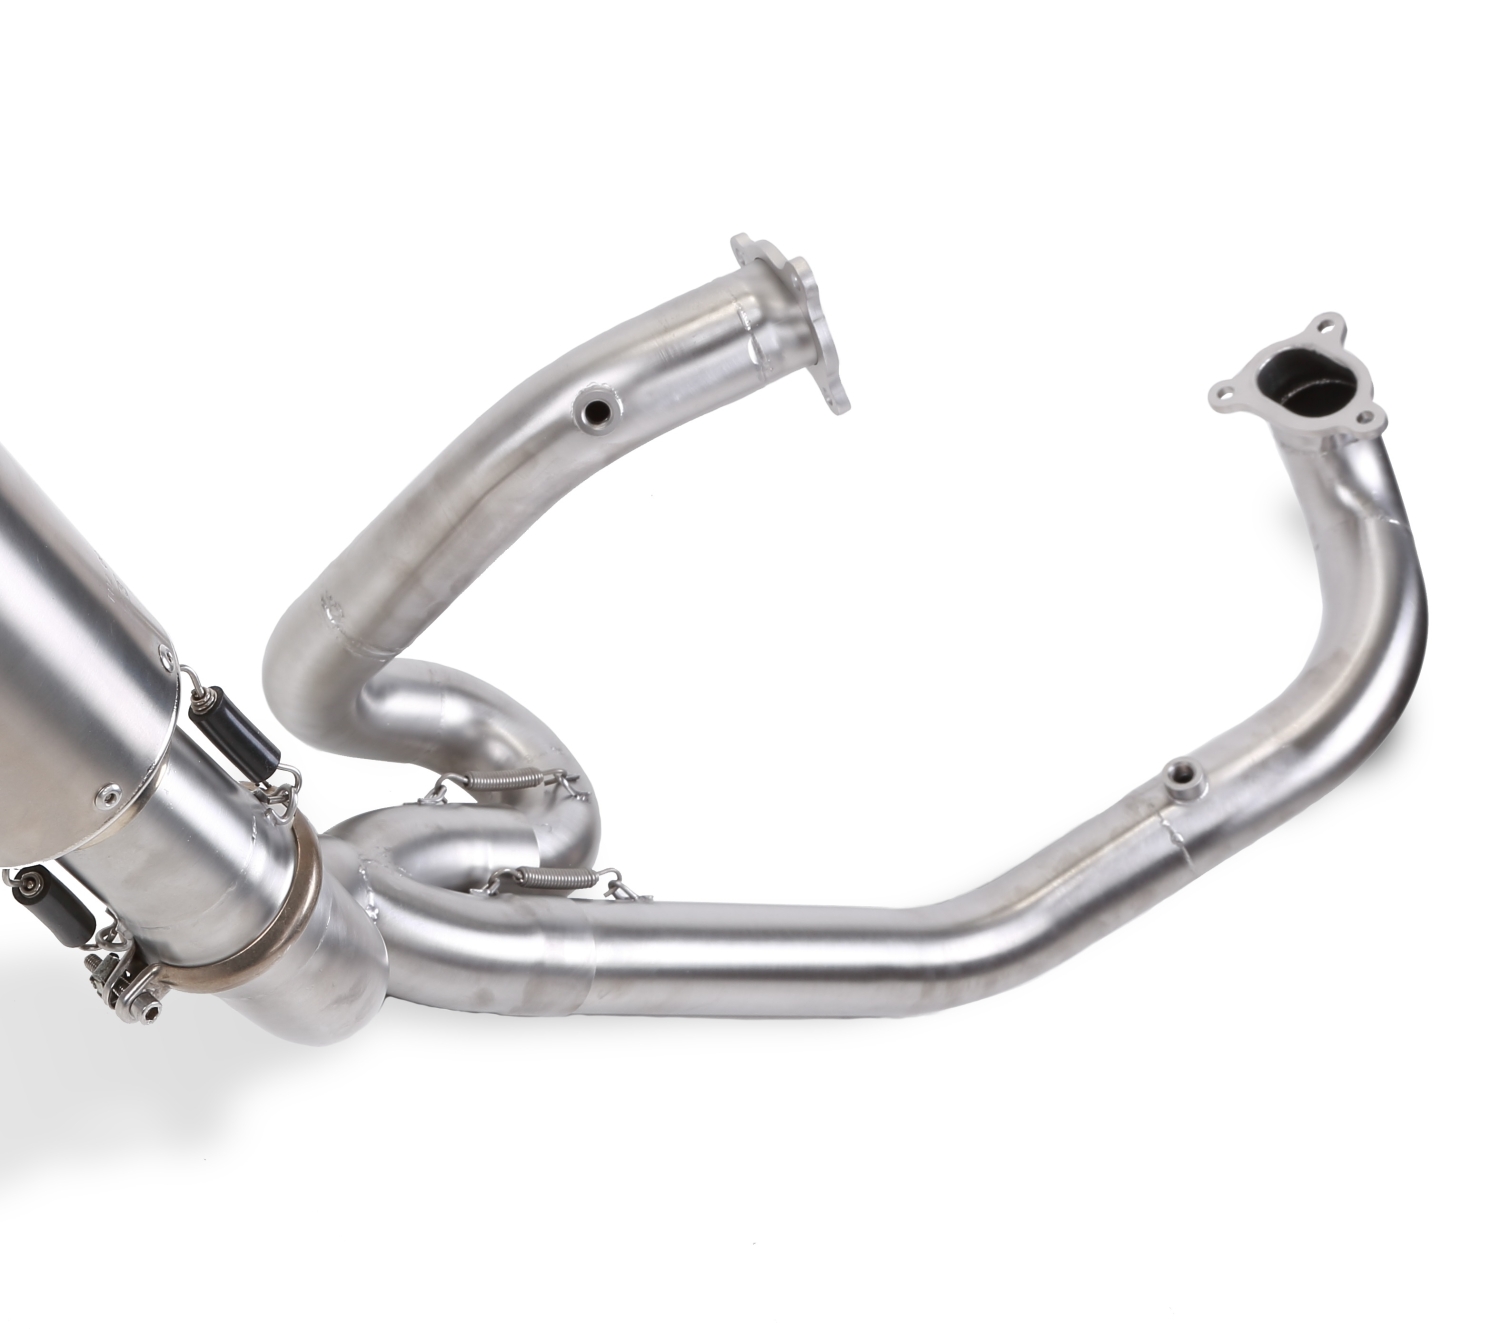 Exhaust system compatible with Ktm LC 8 Super Adventure 1290 R 2021-2024, DUNE Poppy, Racing full system exhaust, including removable db killer/spark arrestor 